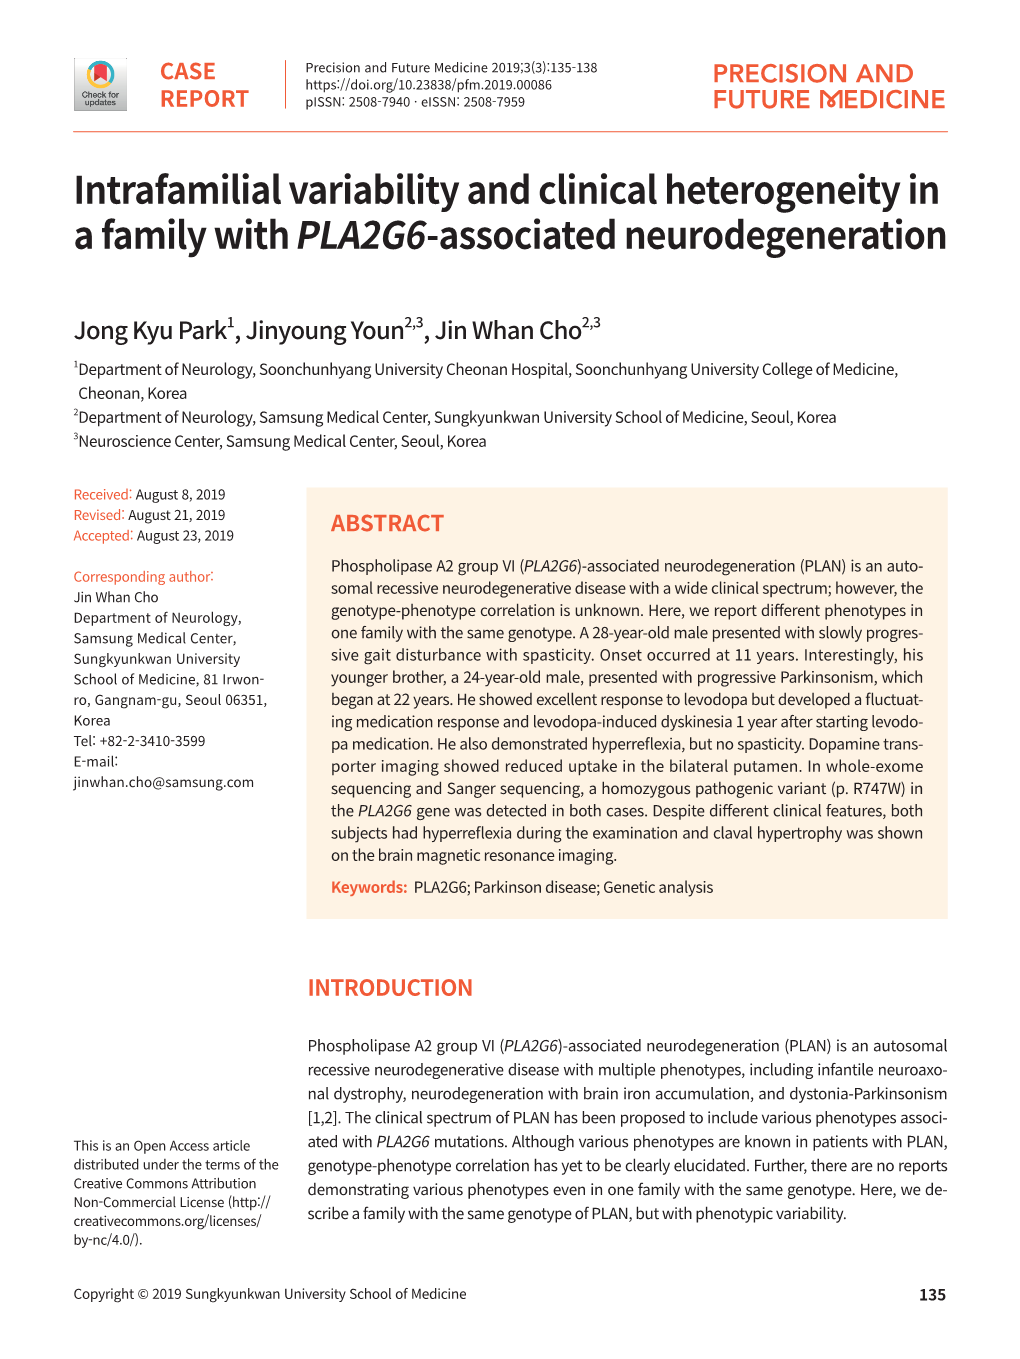 Intrafamilial Variability and Clinical Heterogeneity in a Family with PLA2G6-Associated Neurodegeneration